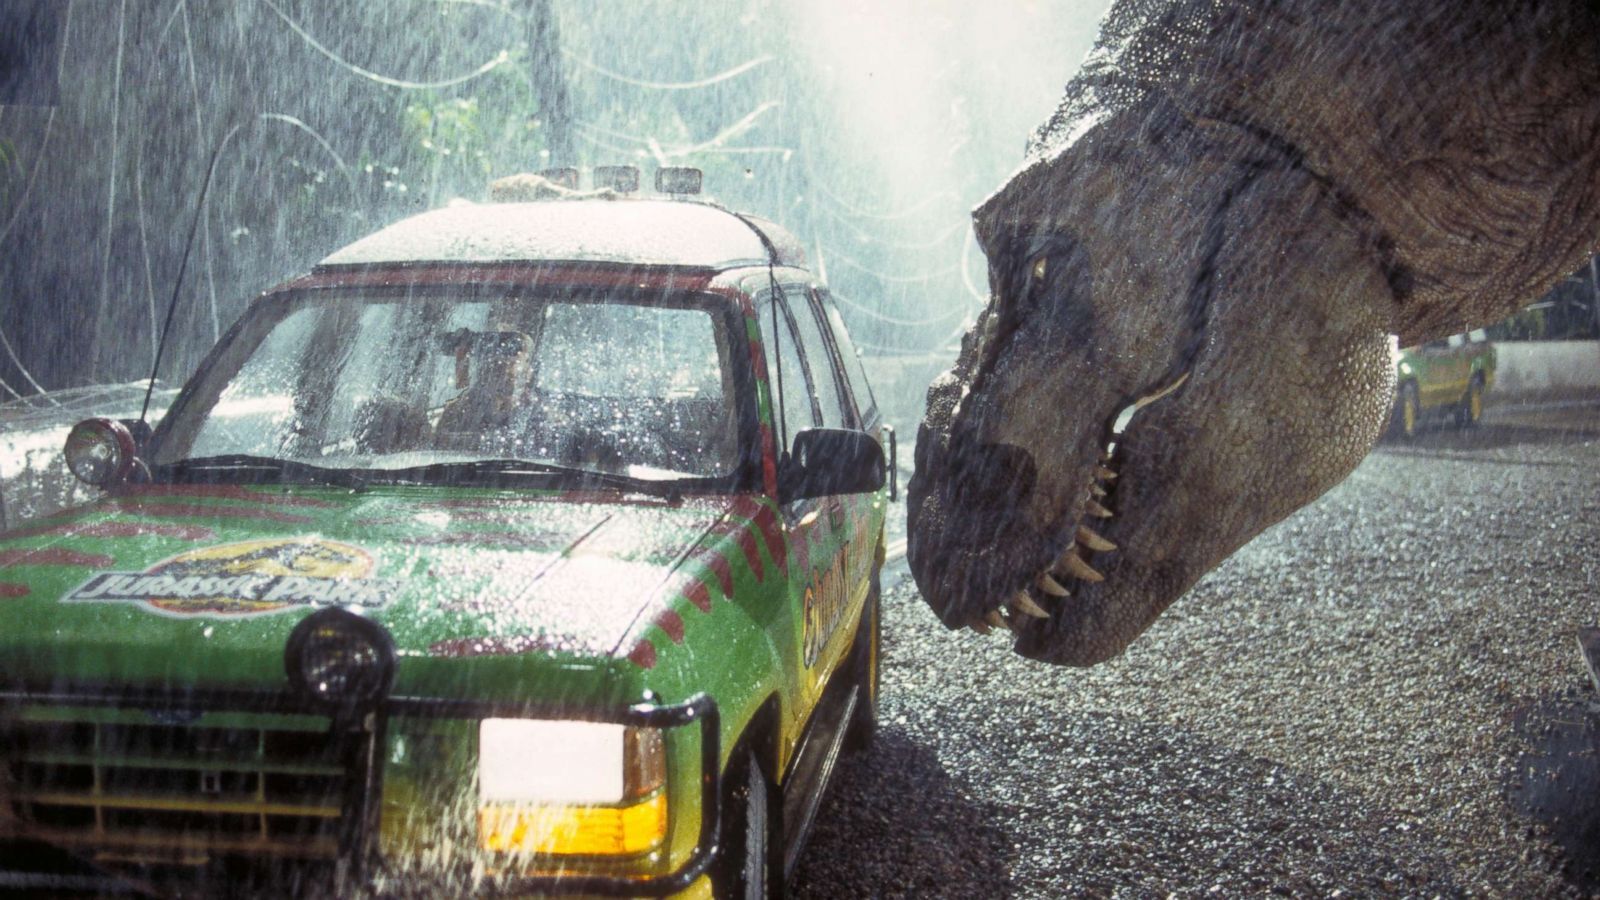 Jurassic Park' Turns 25: Behind The Scenes Moments You May Not